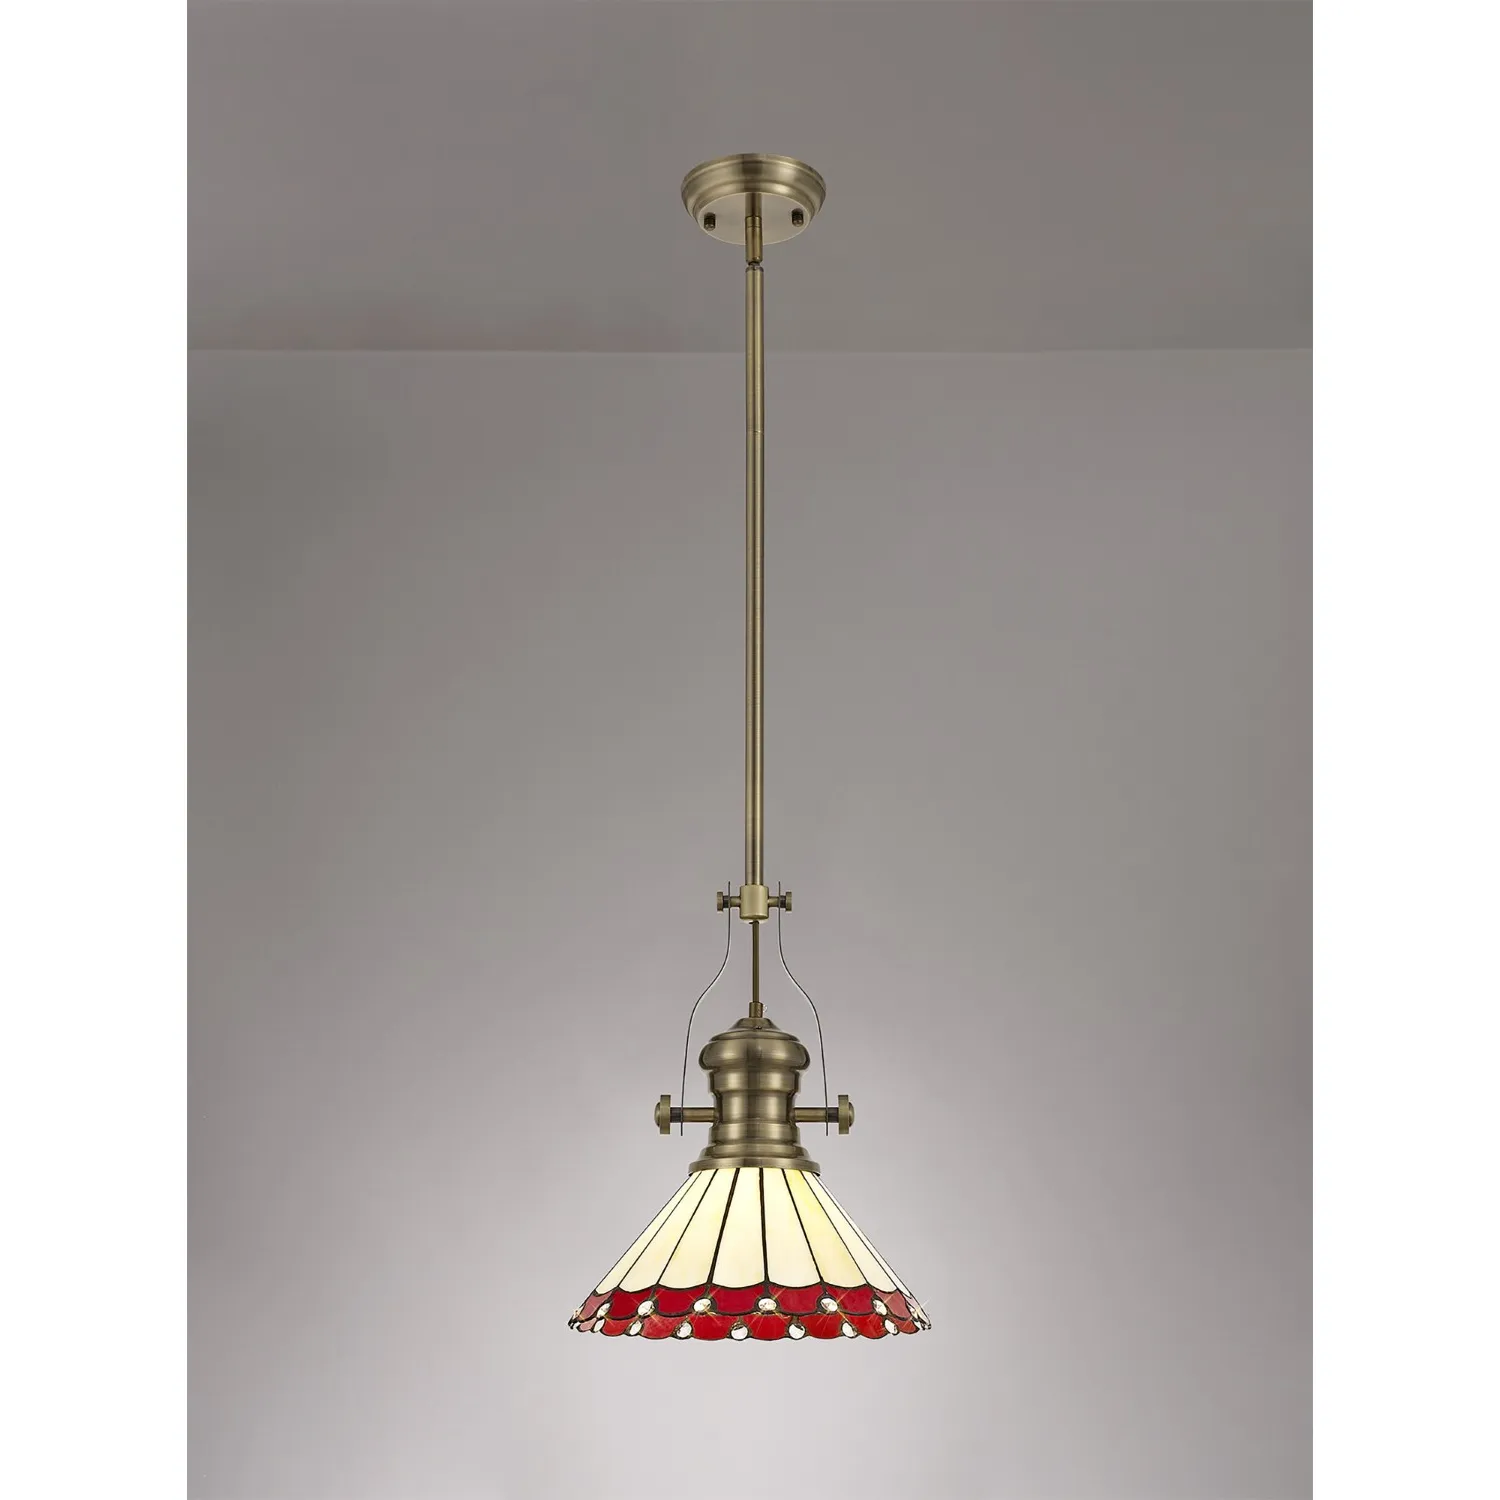 Ware 1 Light Pendant E27 With 30cm Tiffany Shade, Antique Brass Red Cream Crystal